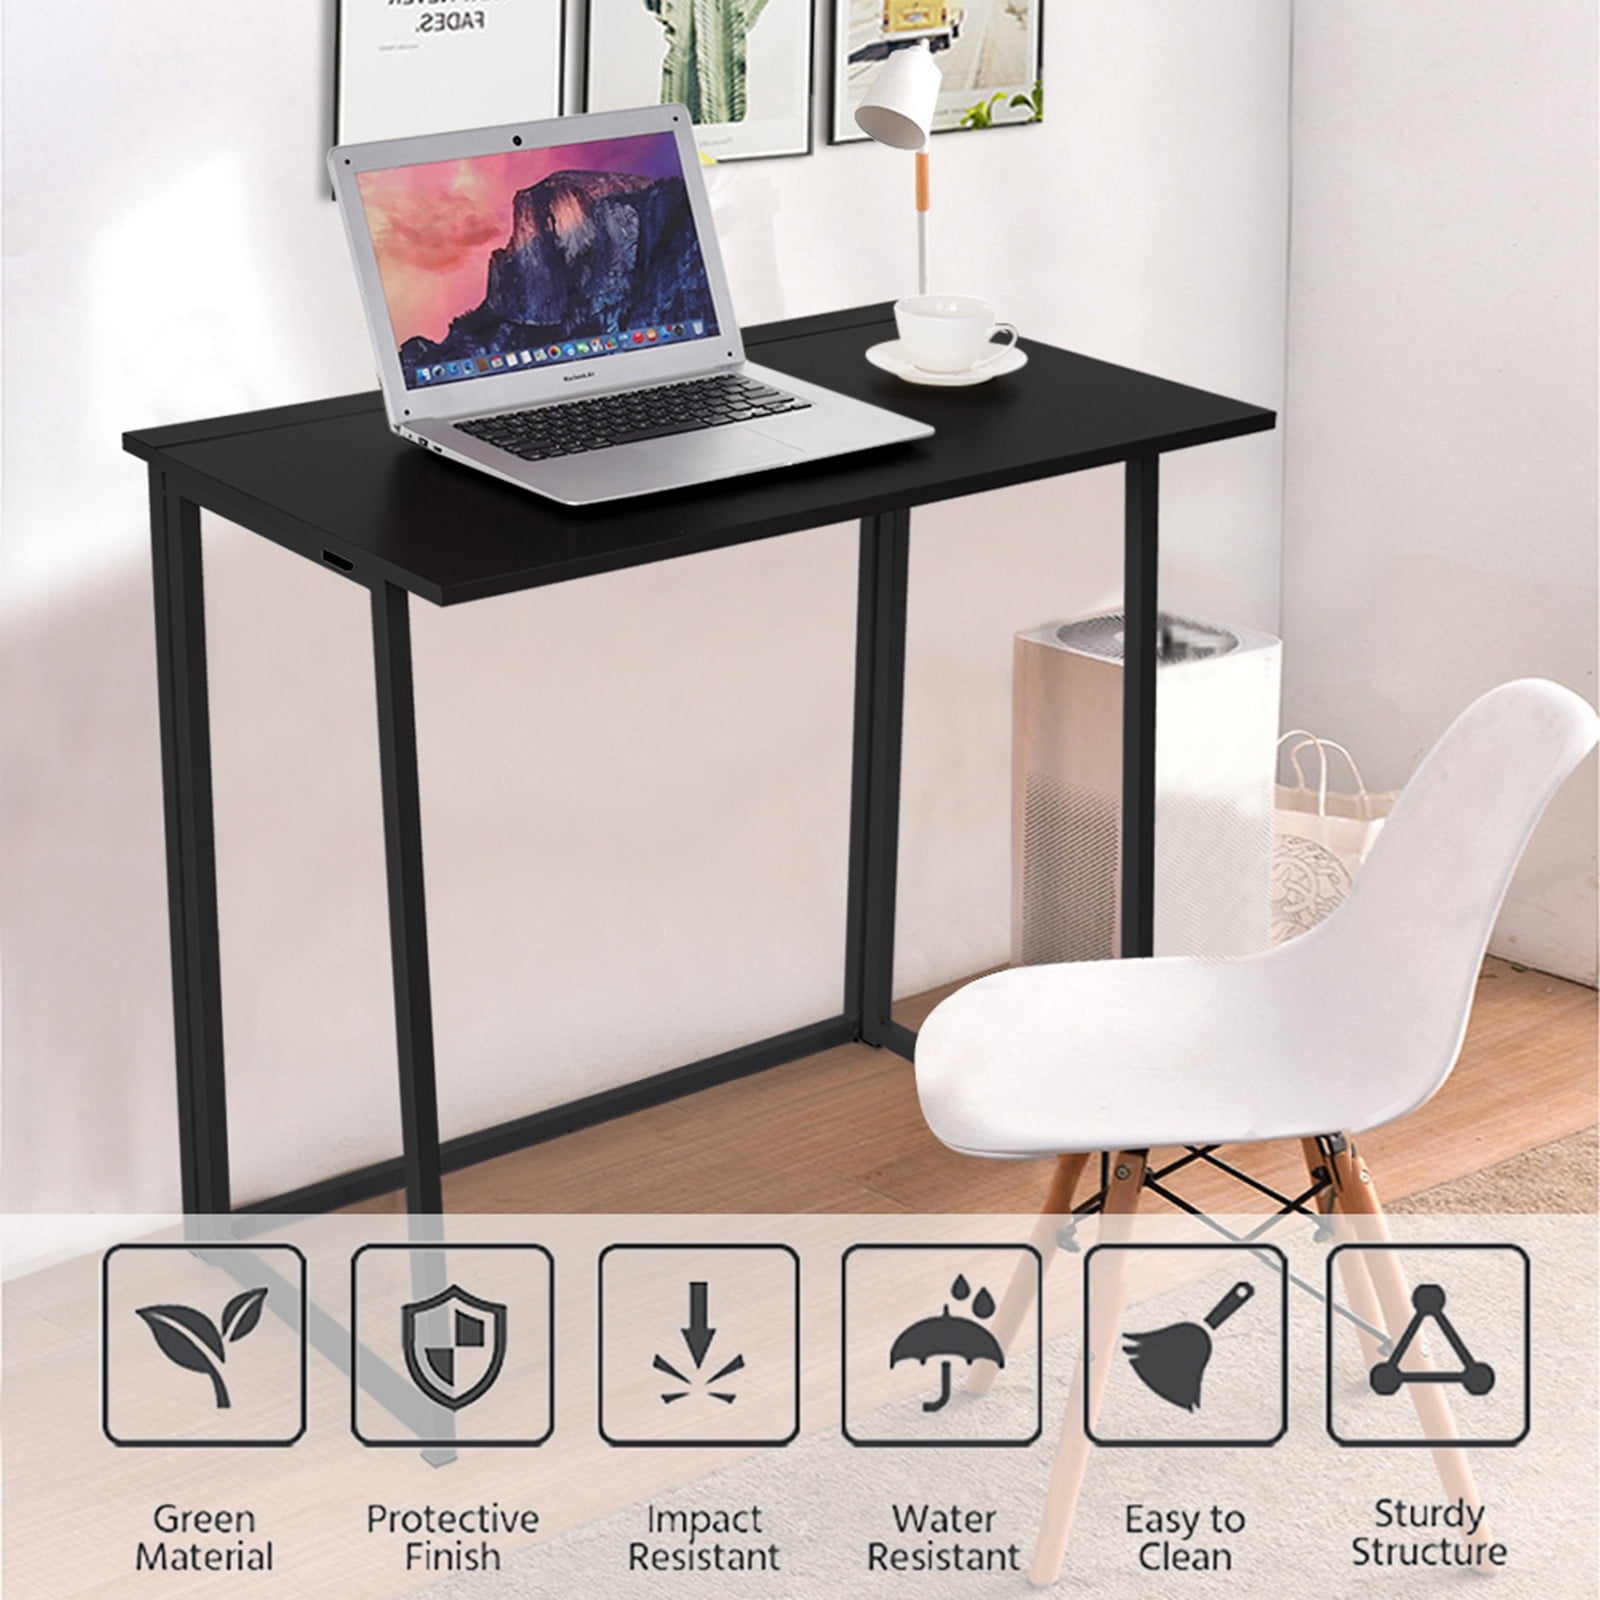 Details about   Folding Study Desk For Small Space Home Office Desk Laptop Writing Table New B 